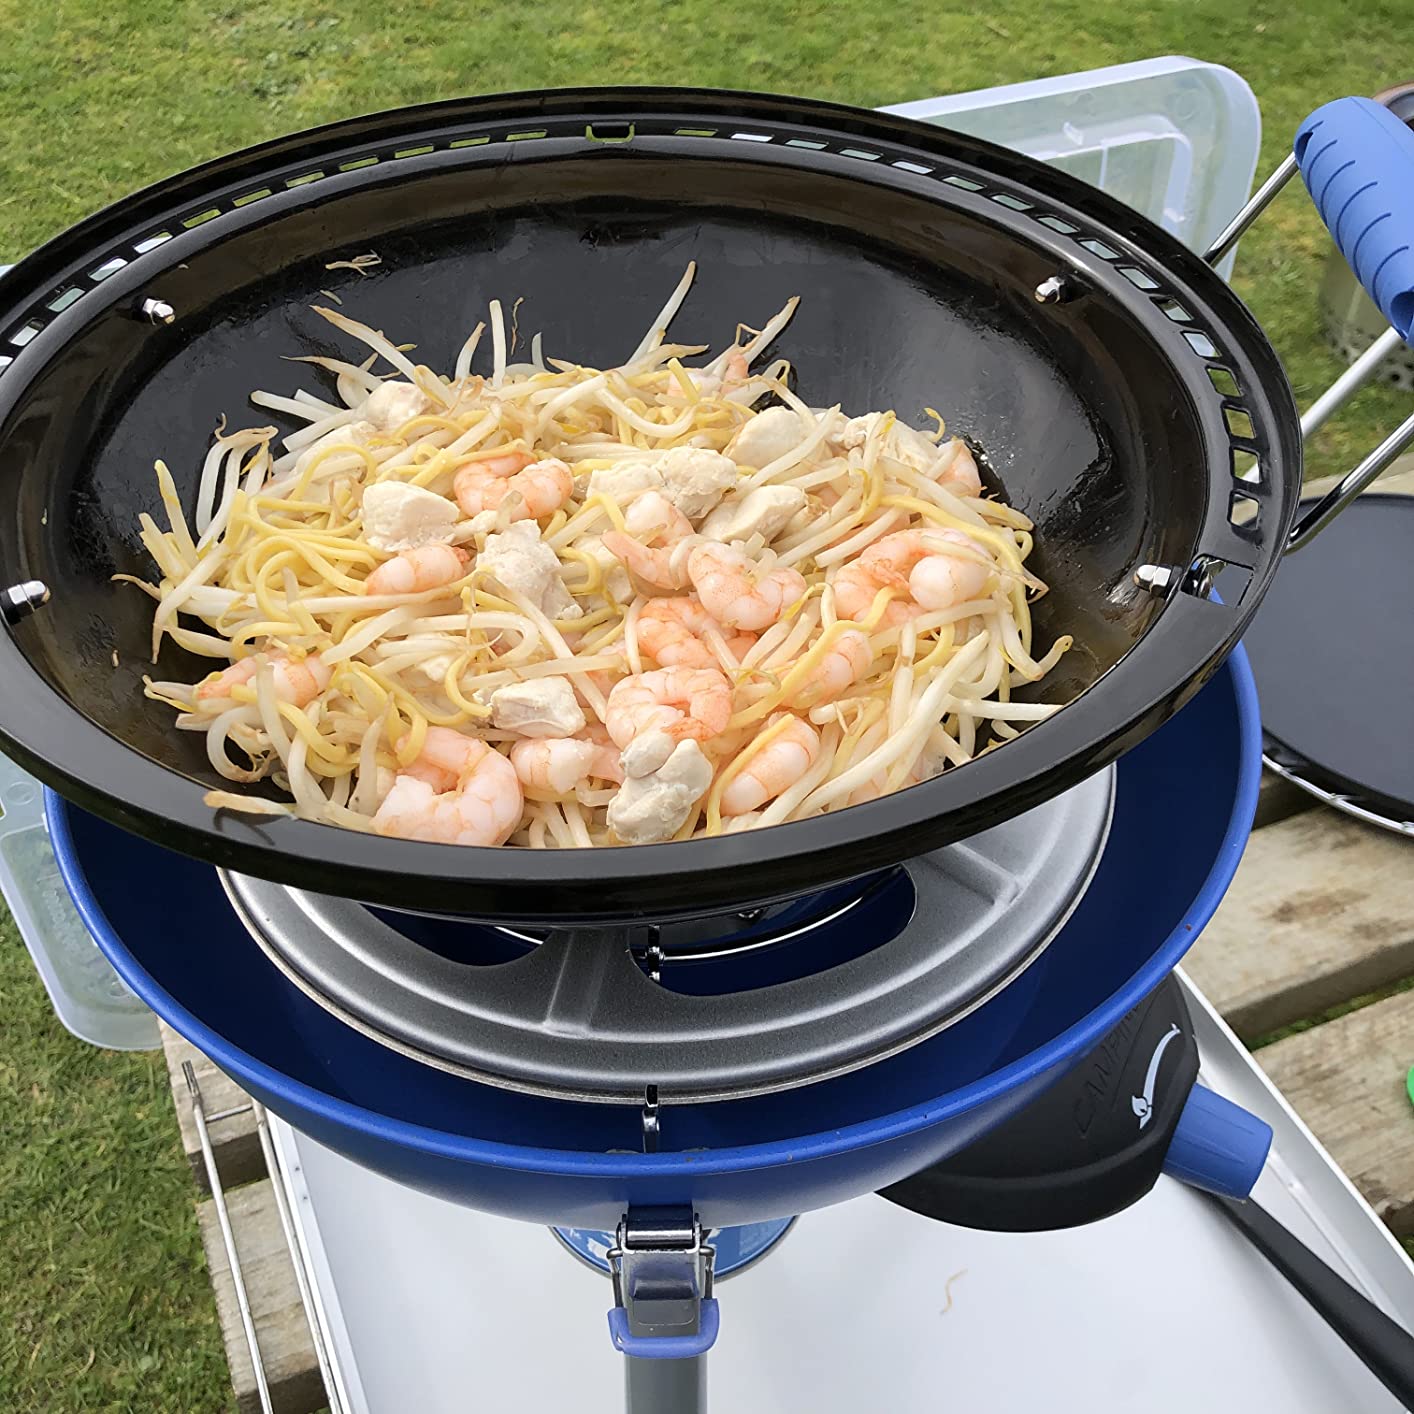 All-in-One Portable Camping Cooker BBQ Grill photo review